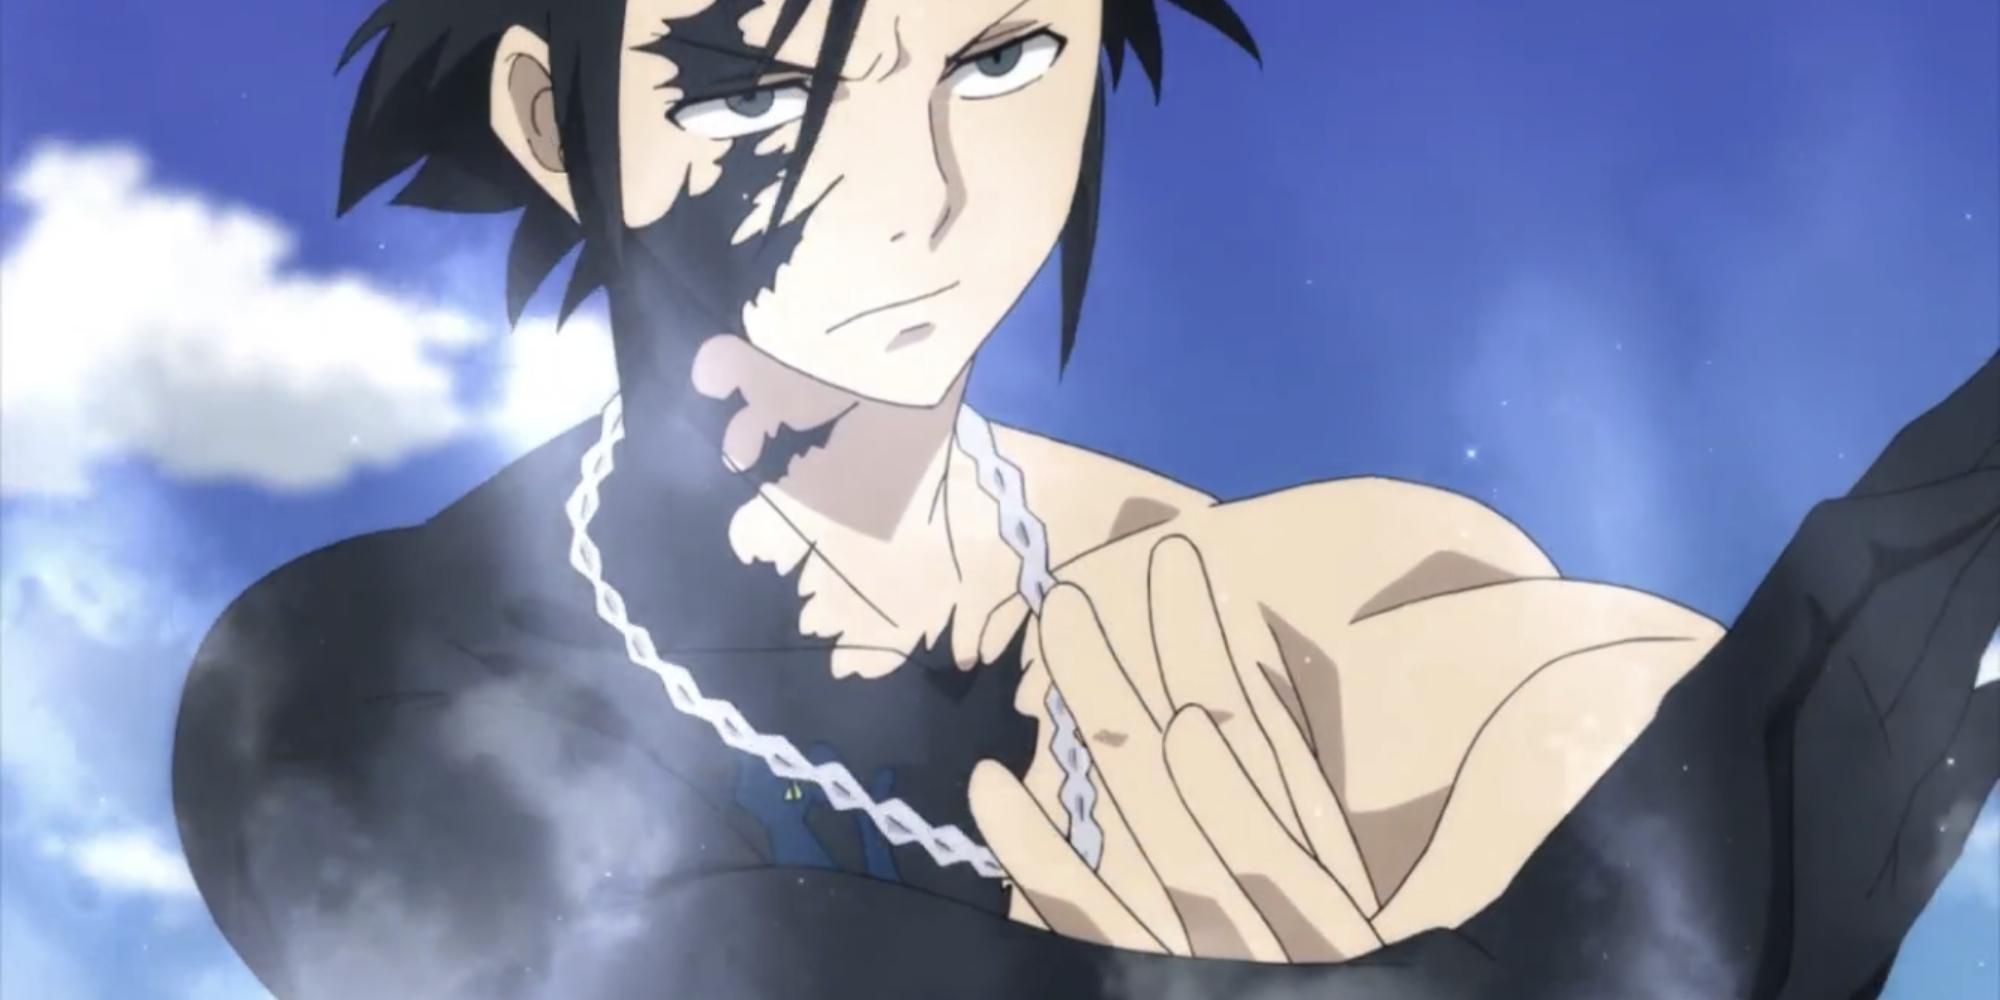 Gray with his tattoo visible in Fairy-Tail